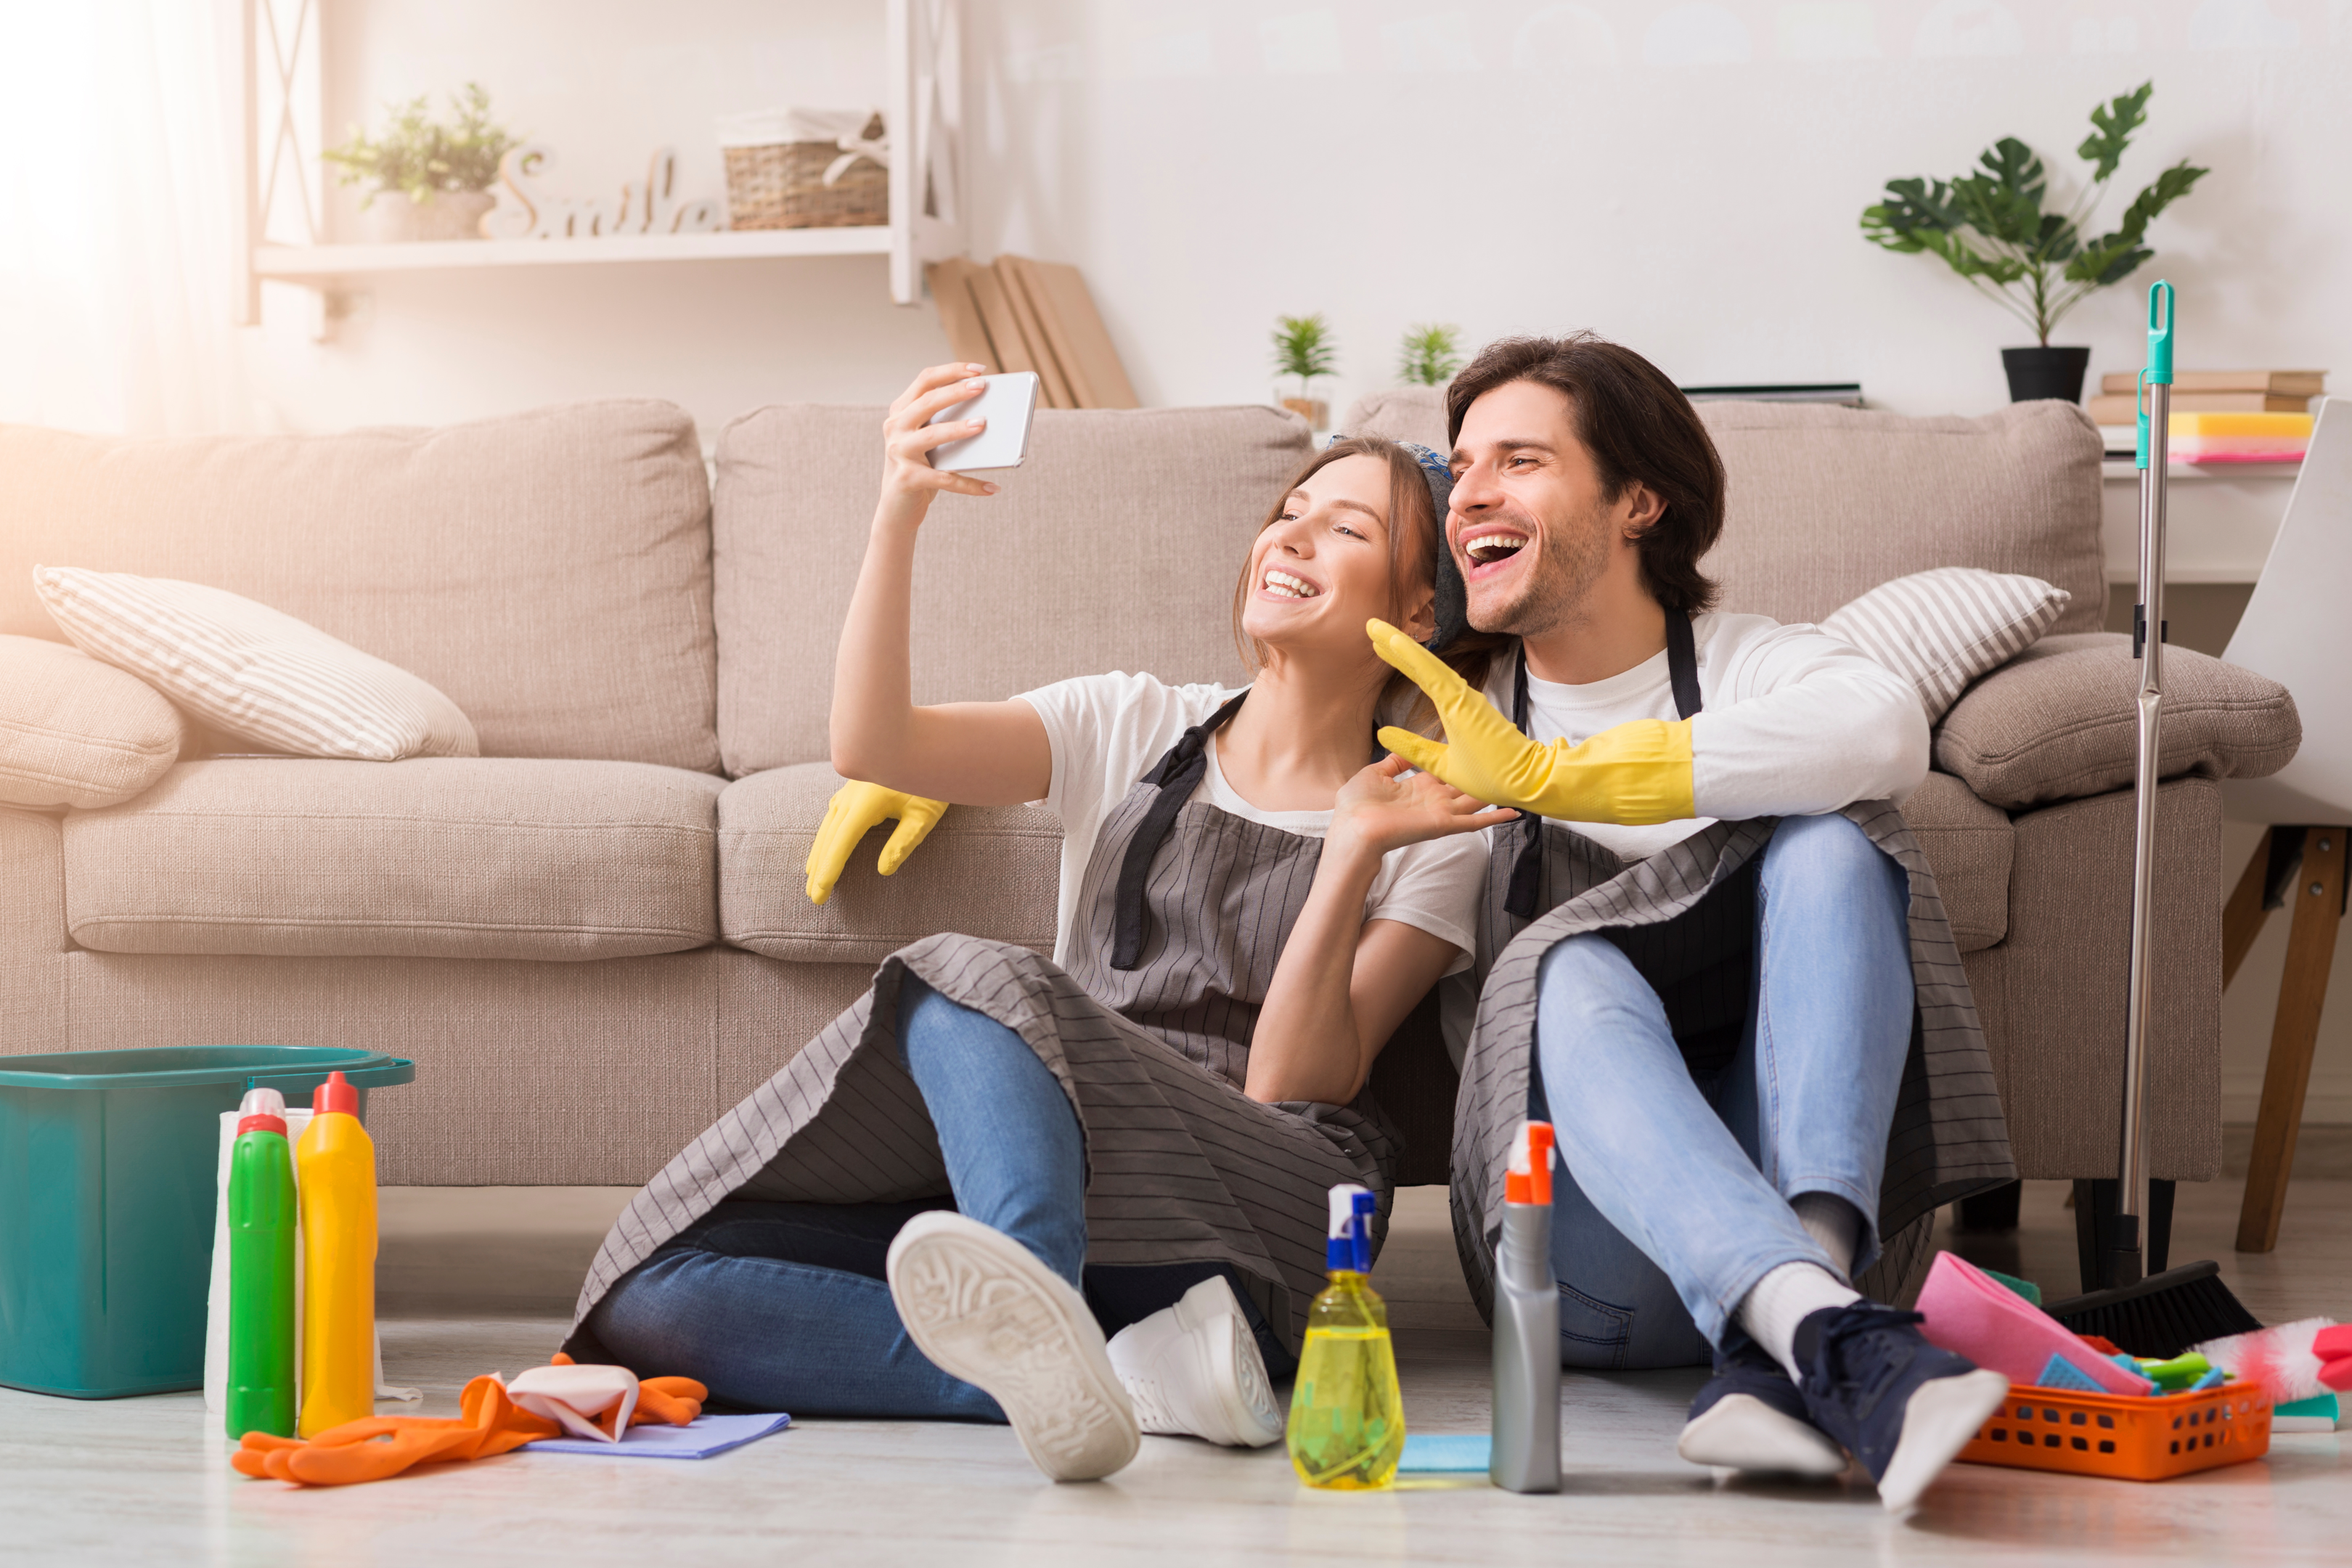 Photo by: AdobeStock/A happy couple after they finish cleaning their home.